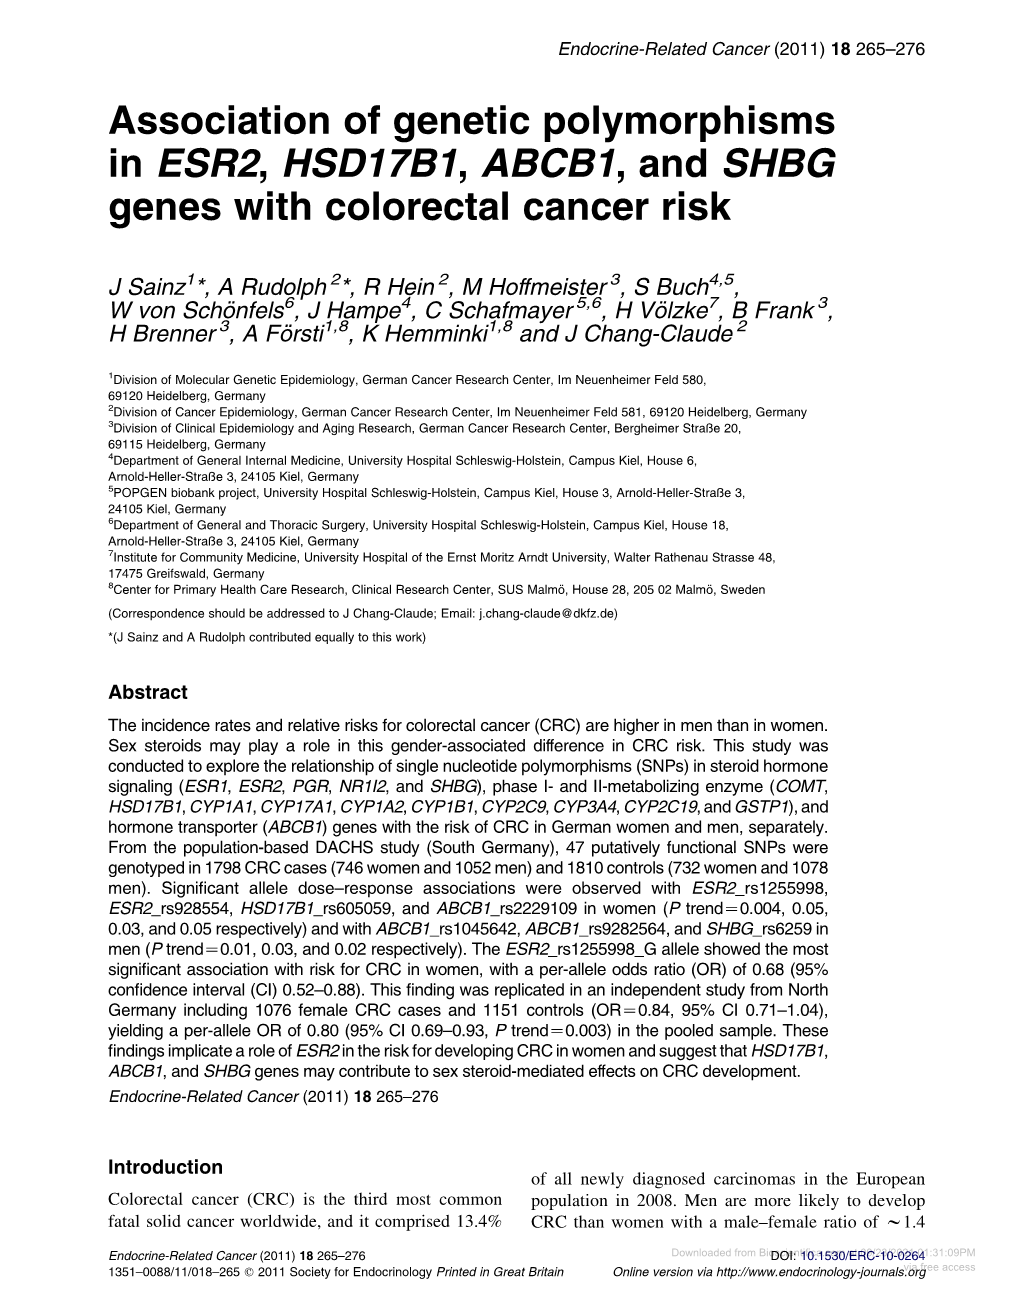 Association of Genetic Polymorphisms in ESR2, HSD17B1, ABCB1, and SHBG Genes with Colorectal Cancer Risk